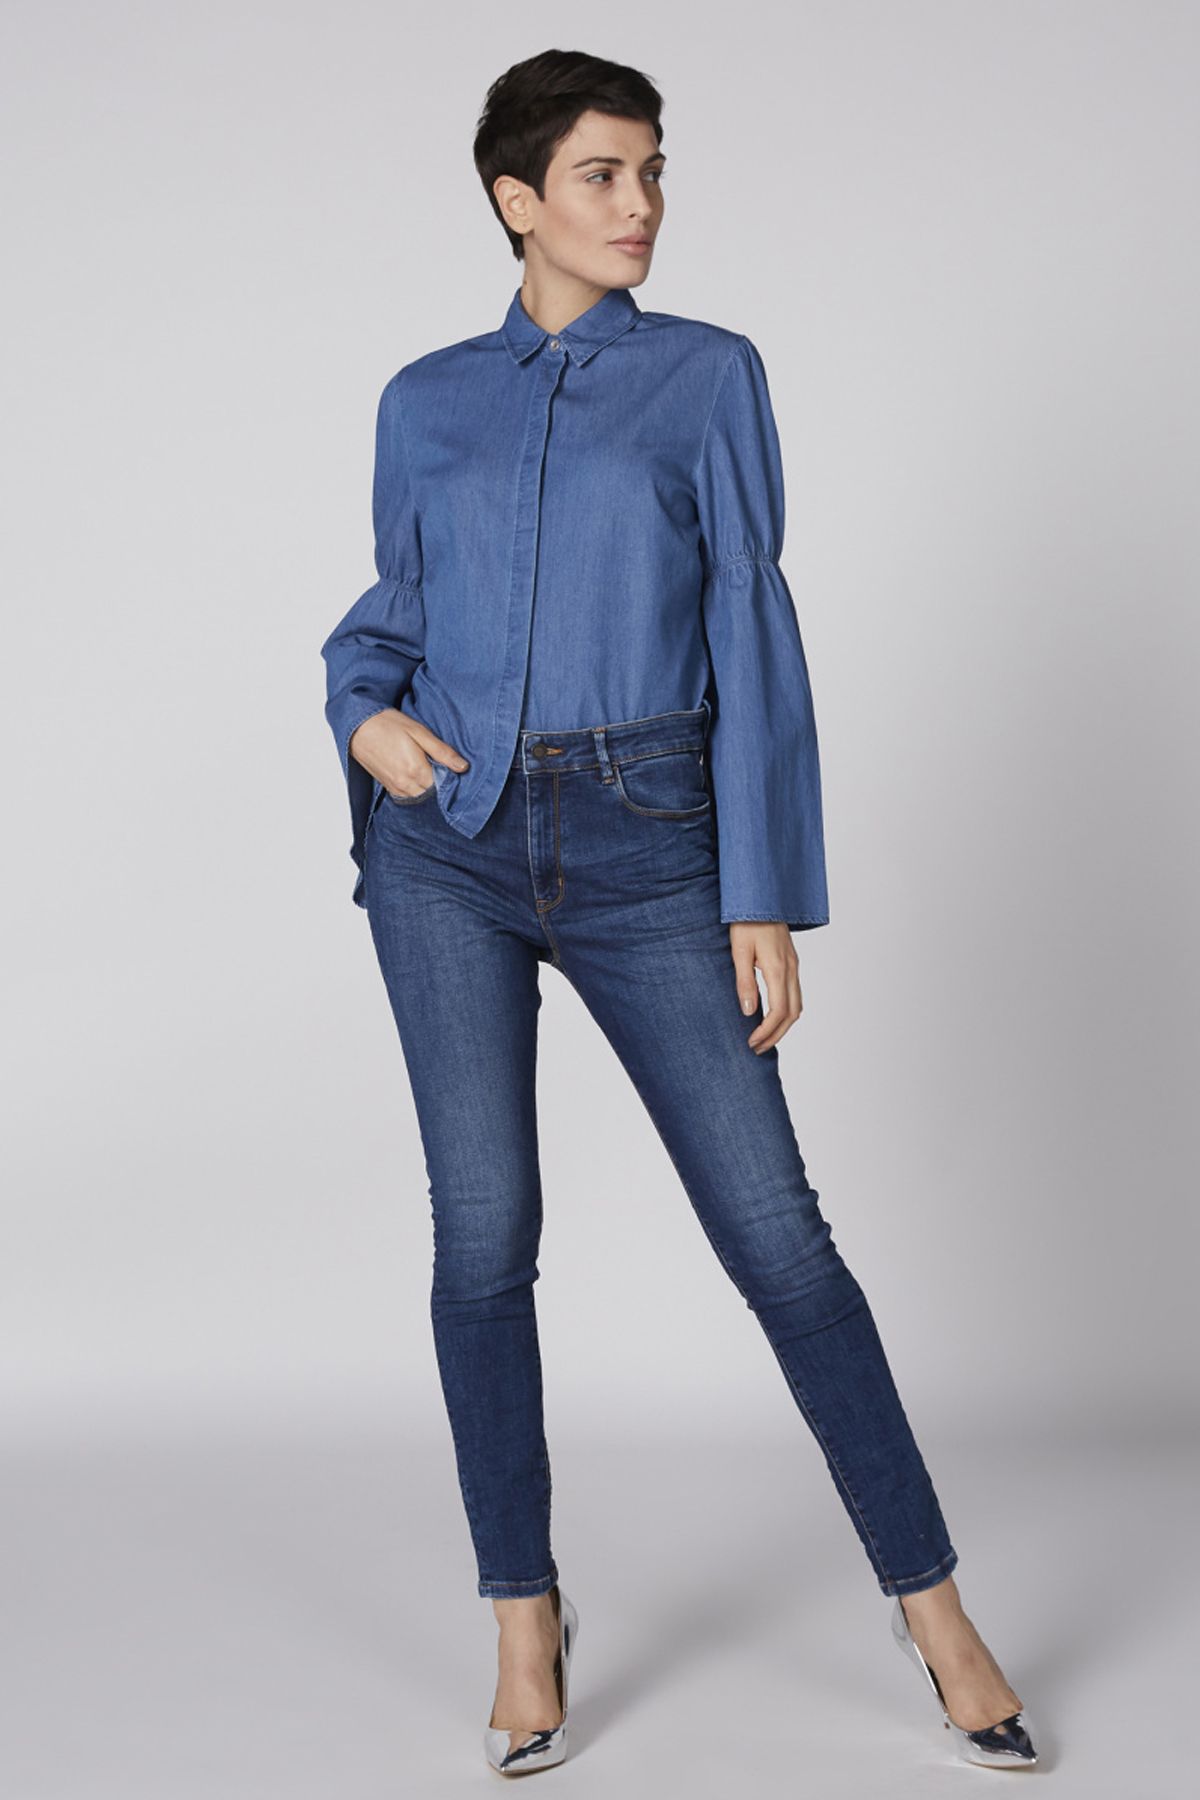 Buy Solid Denim Shirt with Chest Pockets and Long Sleeves | Splash UAE